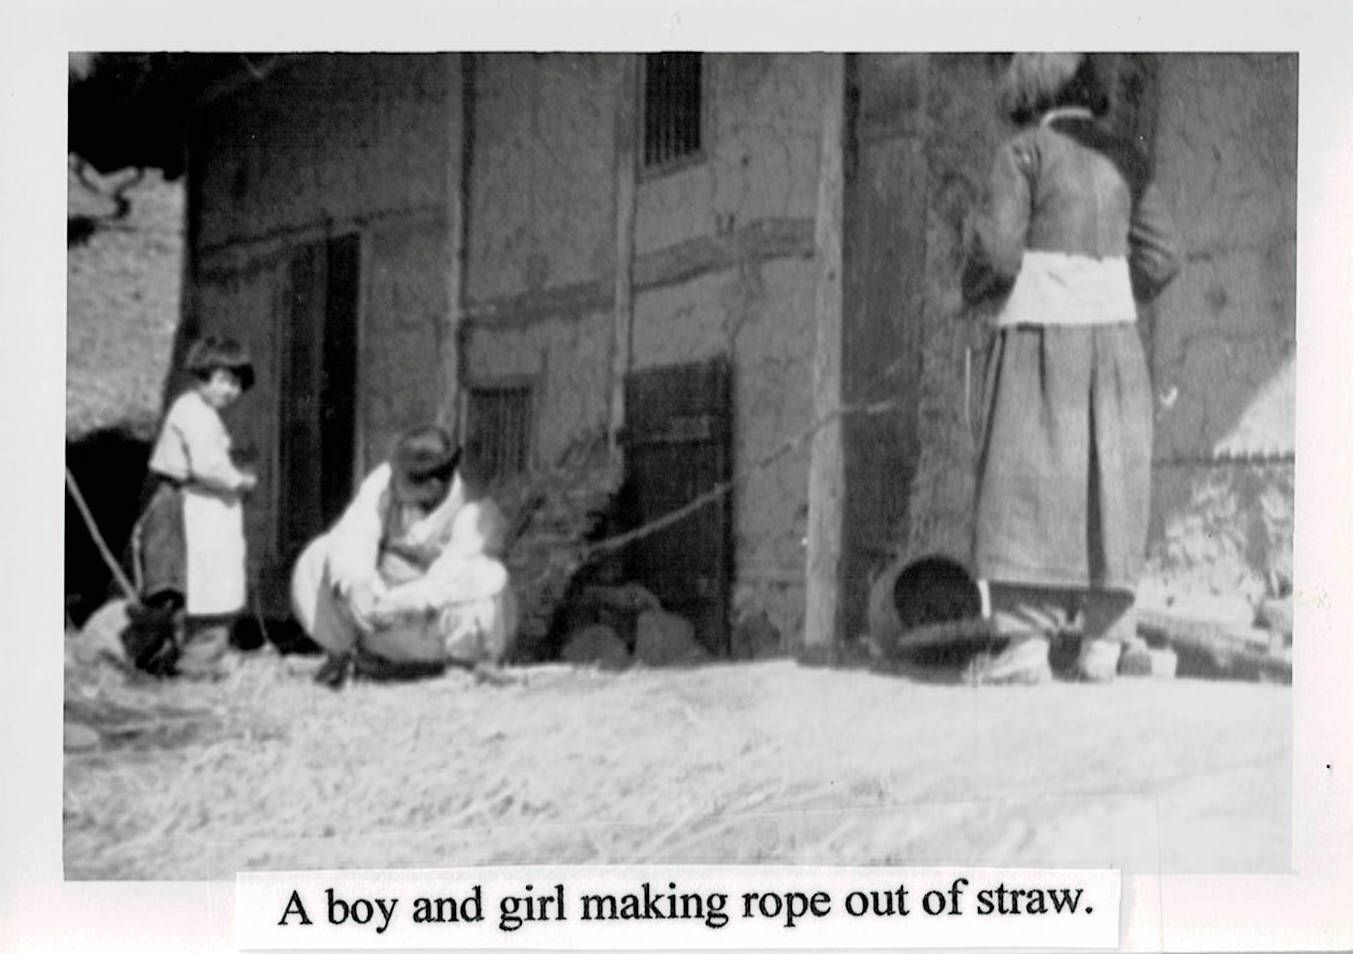 A Boy and Girl Making Rope out of Straw